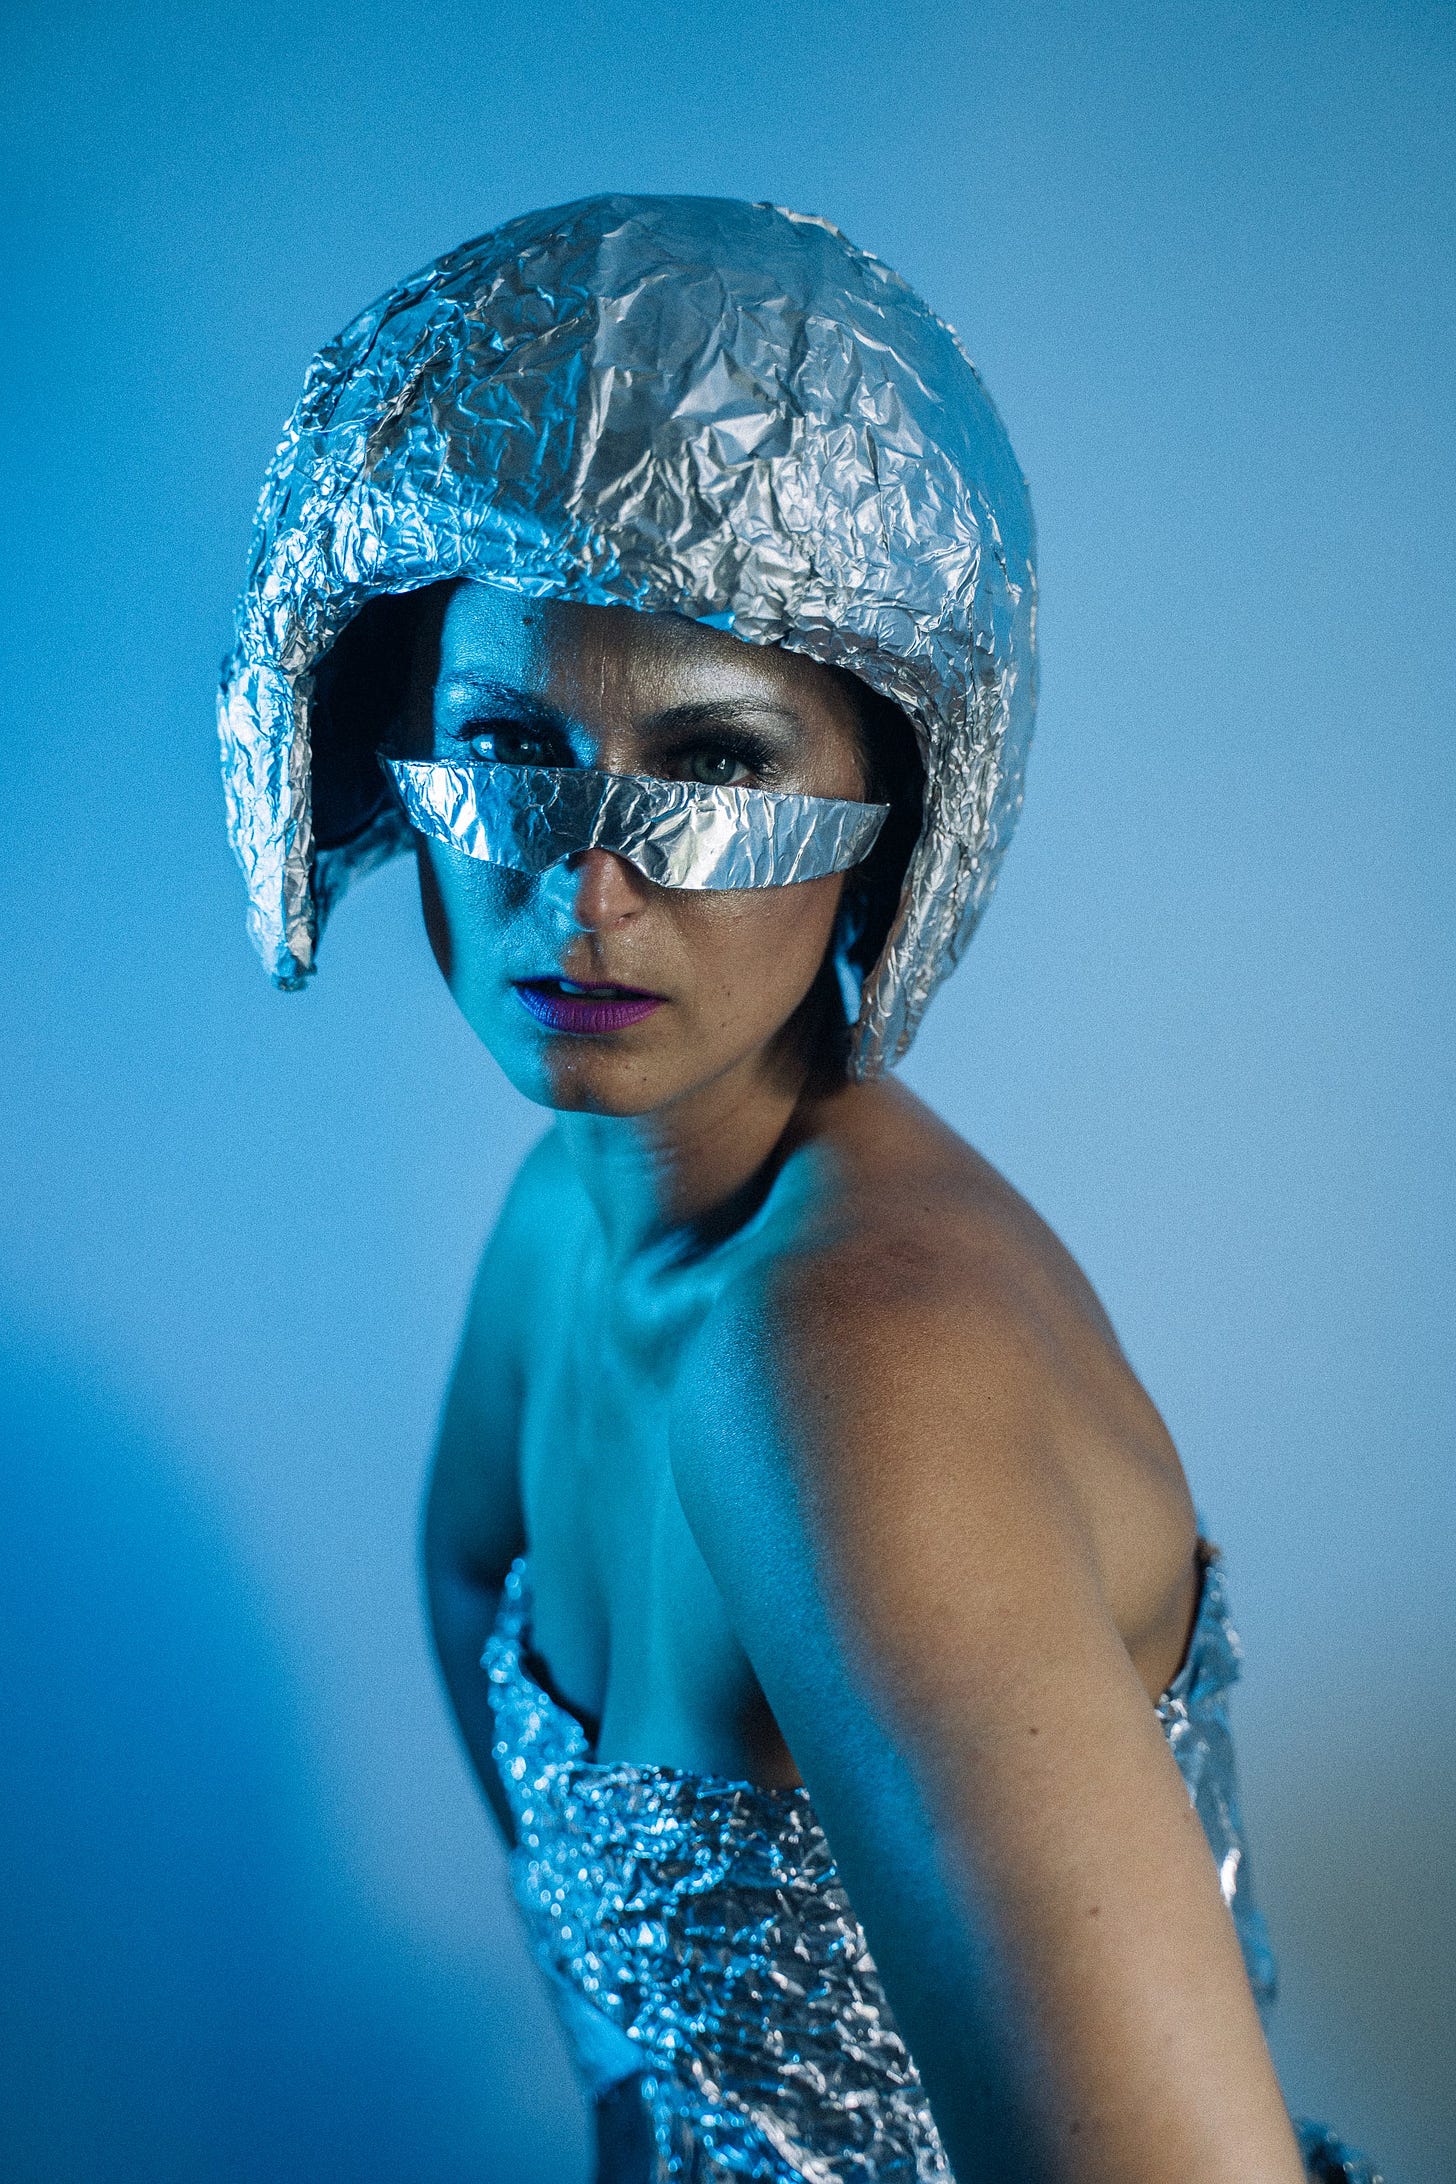 A white woman in a helmet, dress, and sunglasses made of tinfoil. Extremely space.